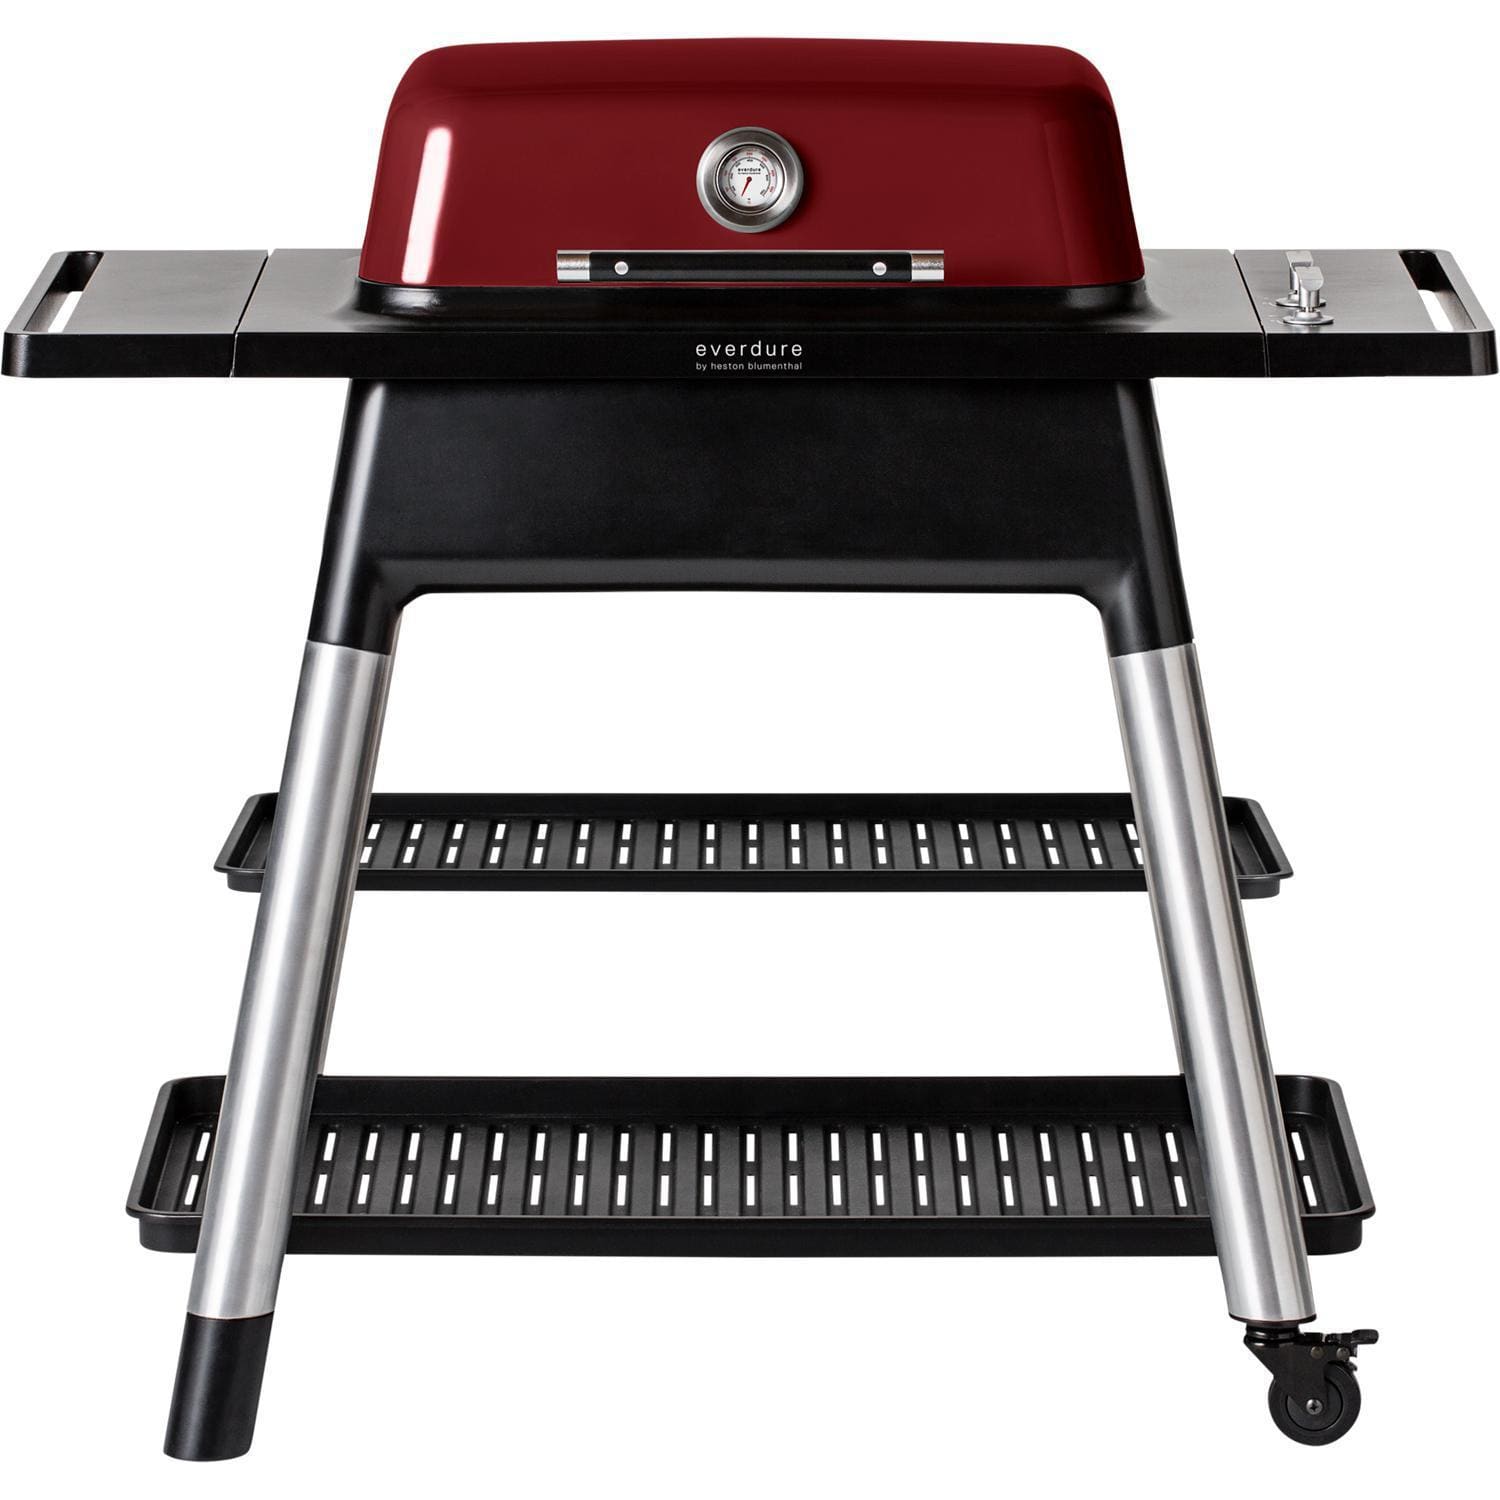 Everdure Propane Gas Grill Red Everdure By Heston Blumenthal FORCE 48-Inch 2-Burner Propane Gas Grill With Stand